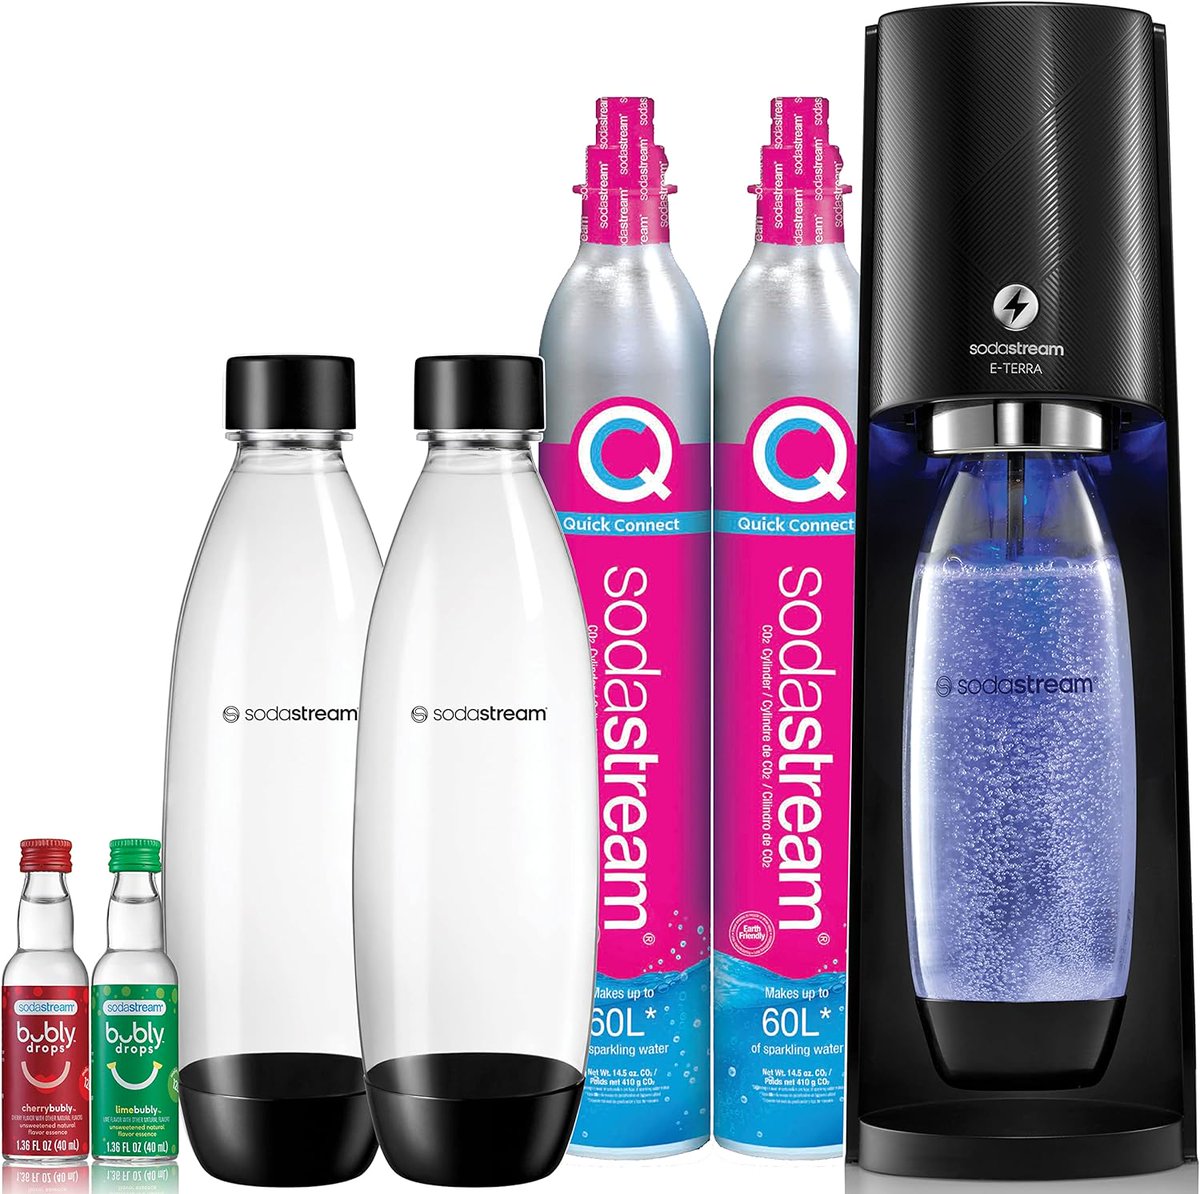 Select SodaStream Soda Makers and Bundles -- Up to 38% off -- FROM $69.99

amzn.to/3w1Liln

#sodastream #kitchenappliance #kitchenappliances #sodamakers #sodamaker #sparklingwater #sparklingwaterdeals #appliances #appliance #sparklingwatermaker #sparklingwatermakers #deal